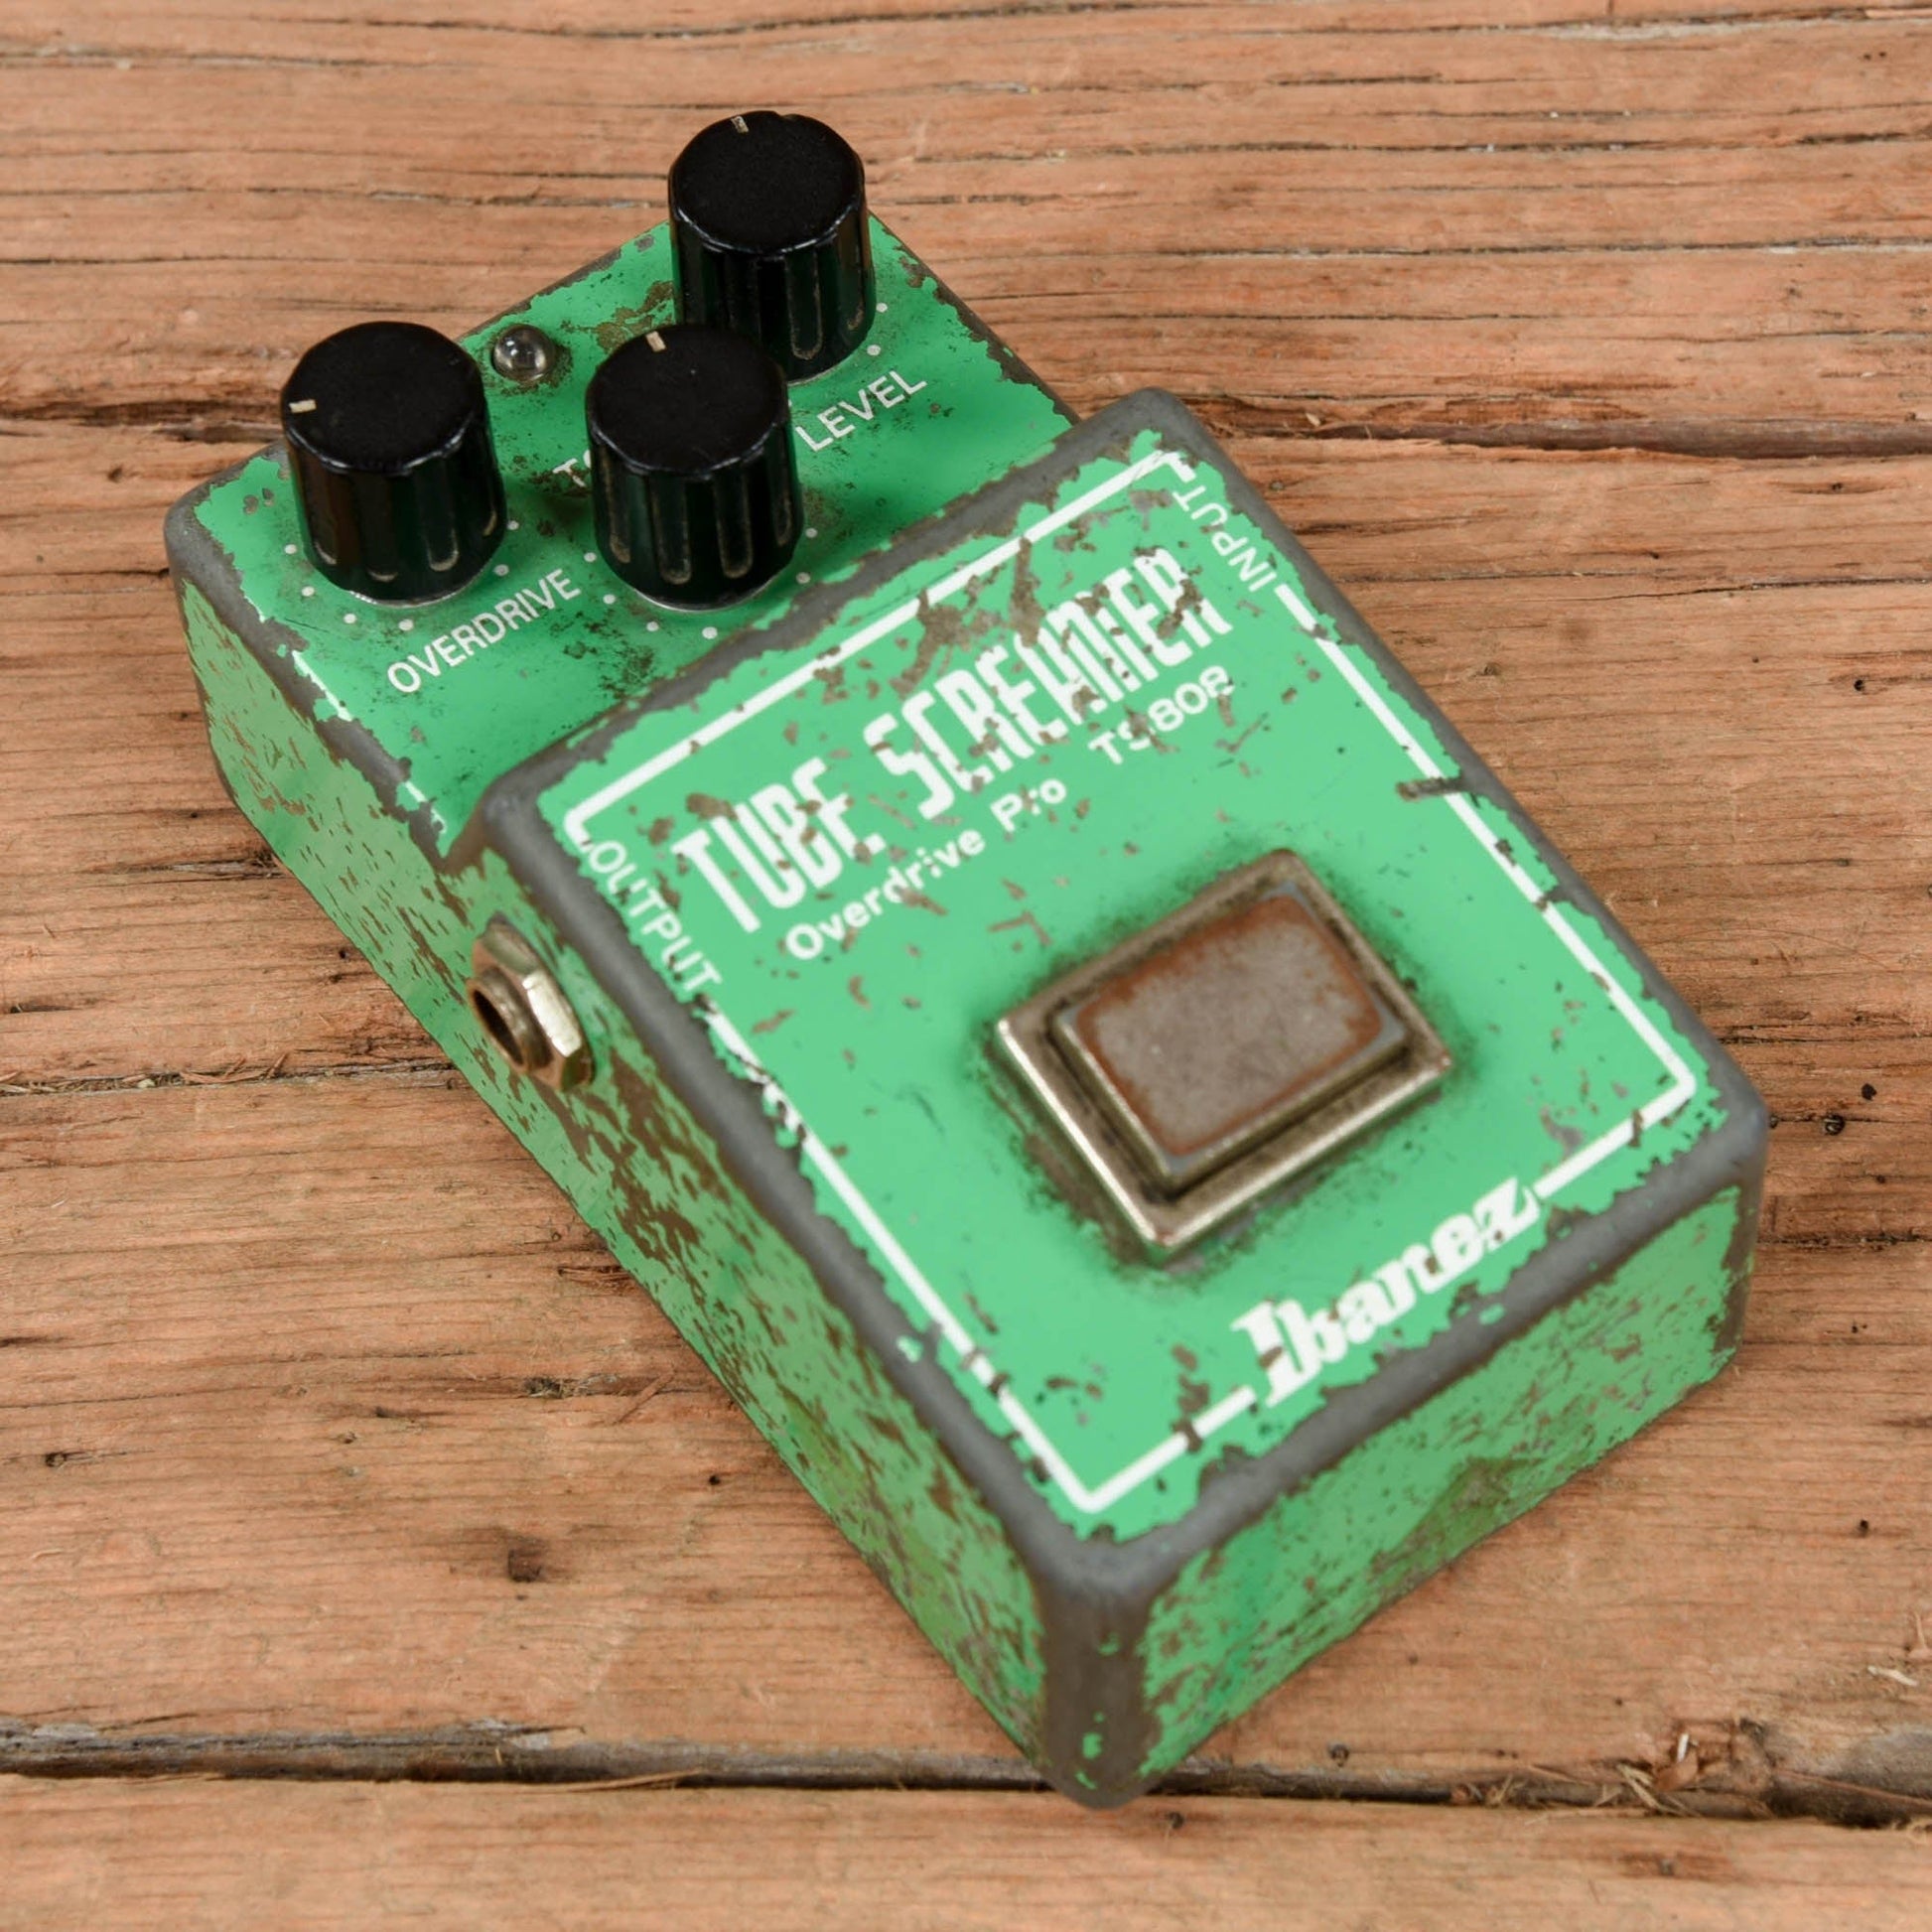 Ibanez TS-808 Tube Screamer Previously Owned by SRV 1980s Effects and Pedals / Overdrive and Boost